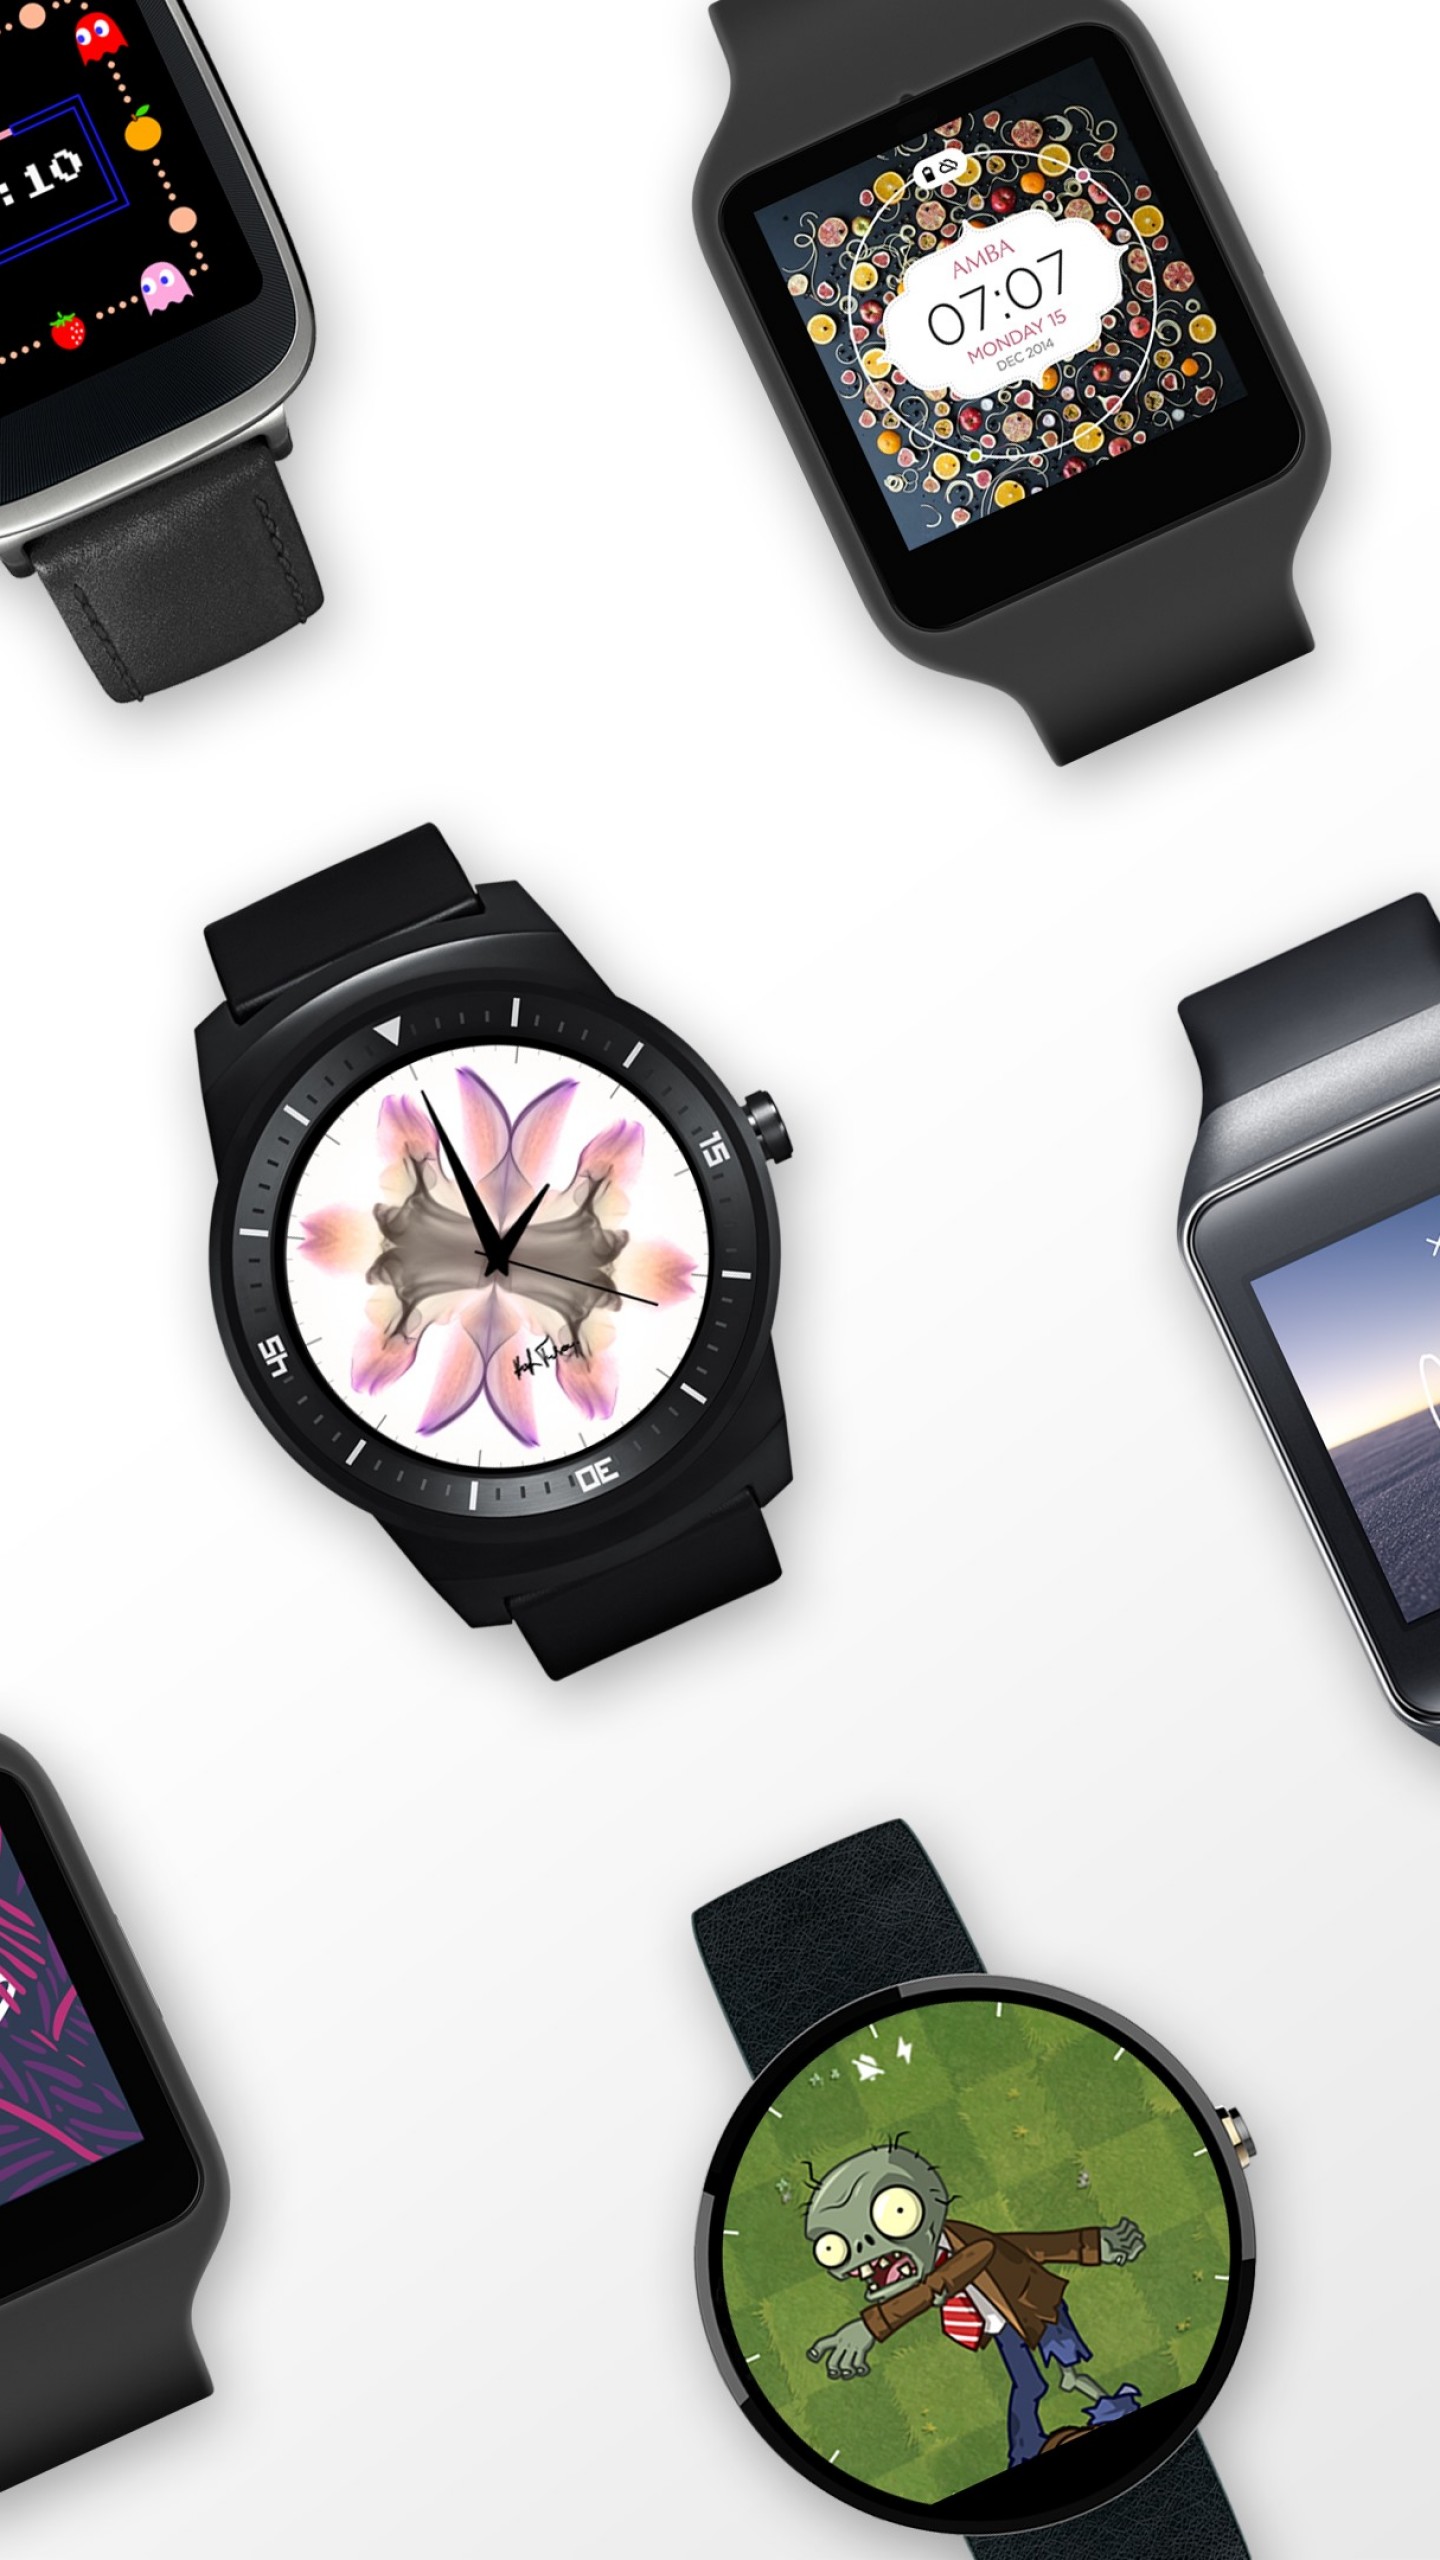 android wear wallpaper,analog watch,watch,watch accessory,fashion accessory,gadget